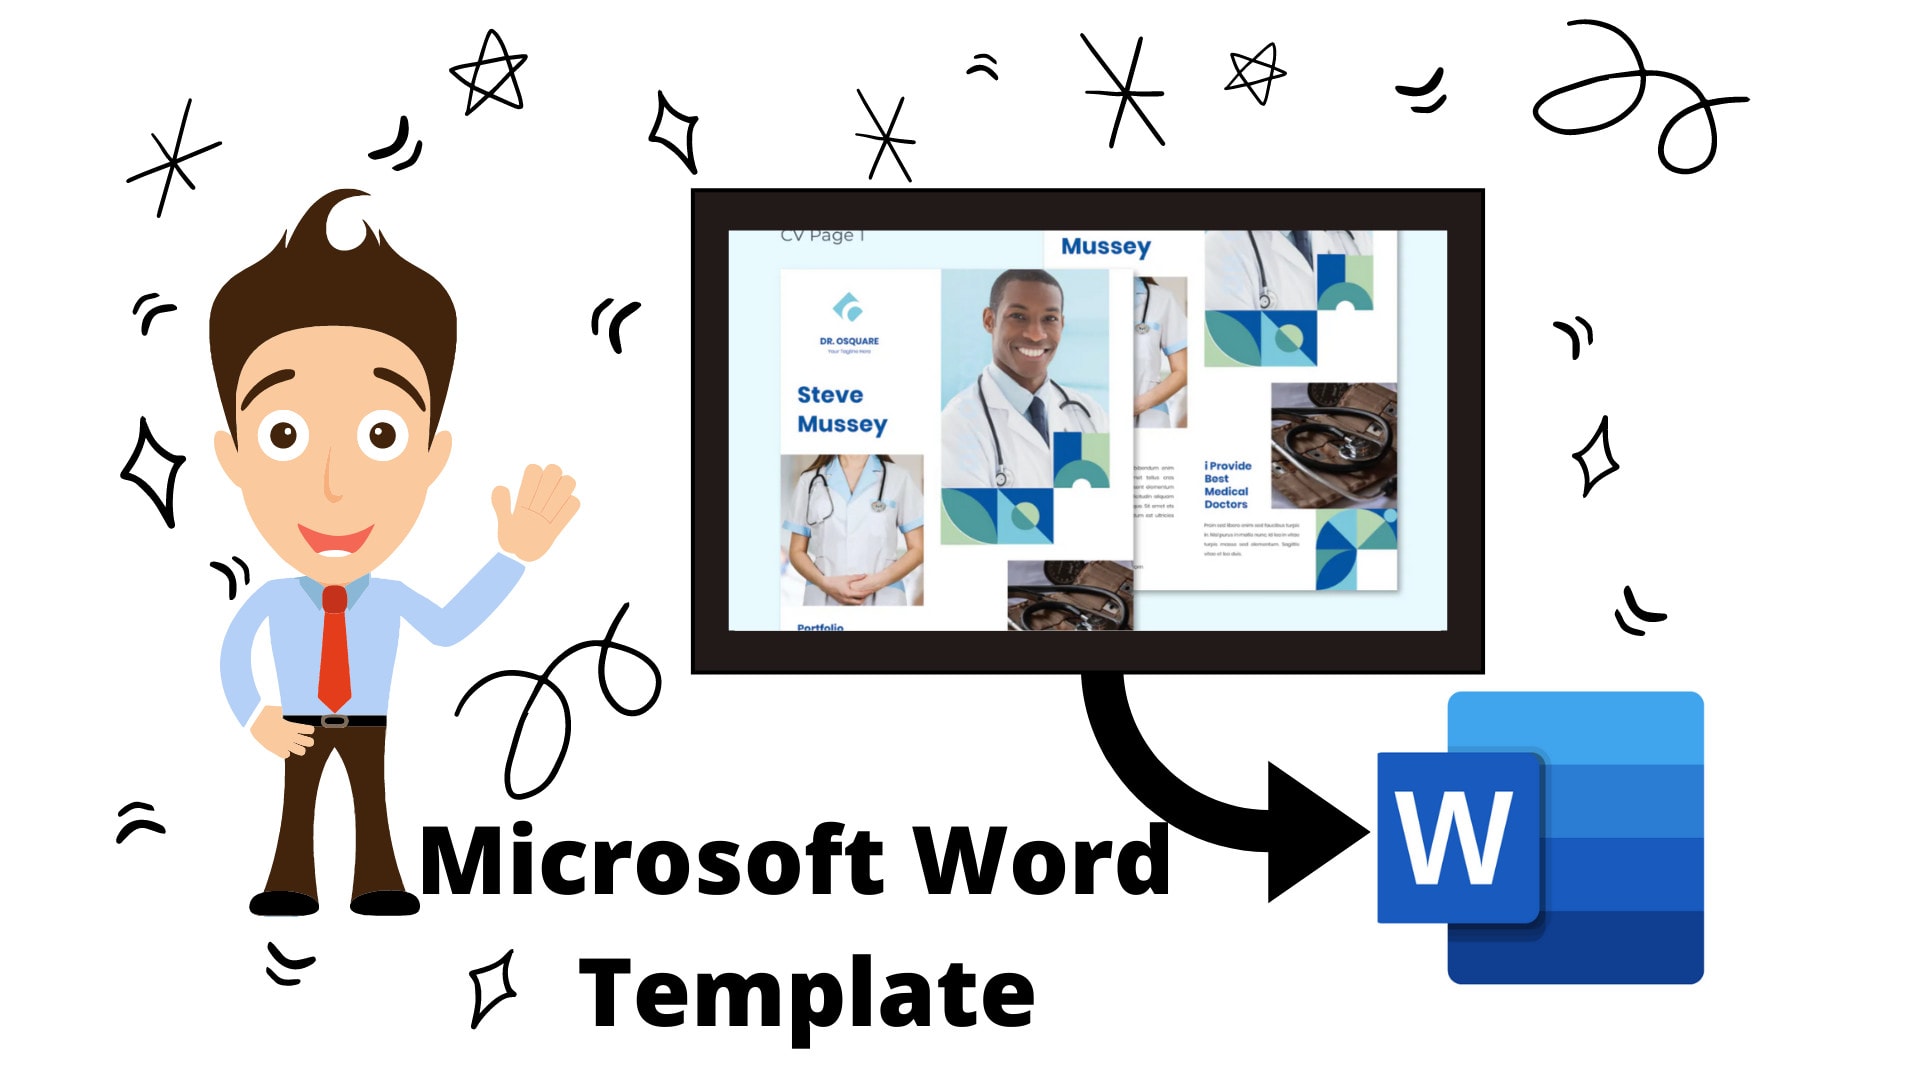 Design microsoft ms word document template by Hashimali372 | Fiverr